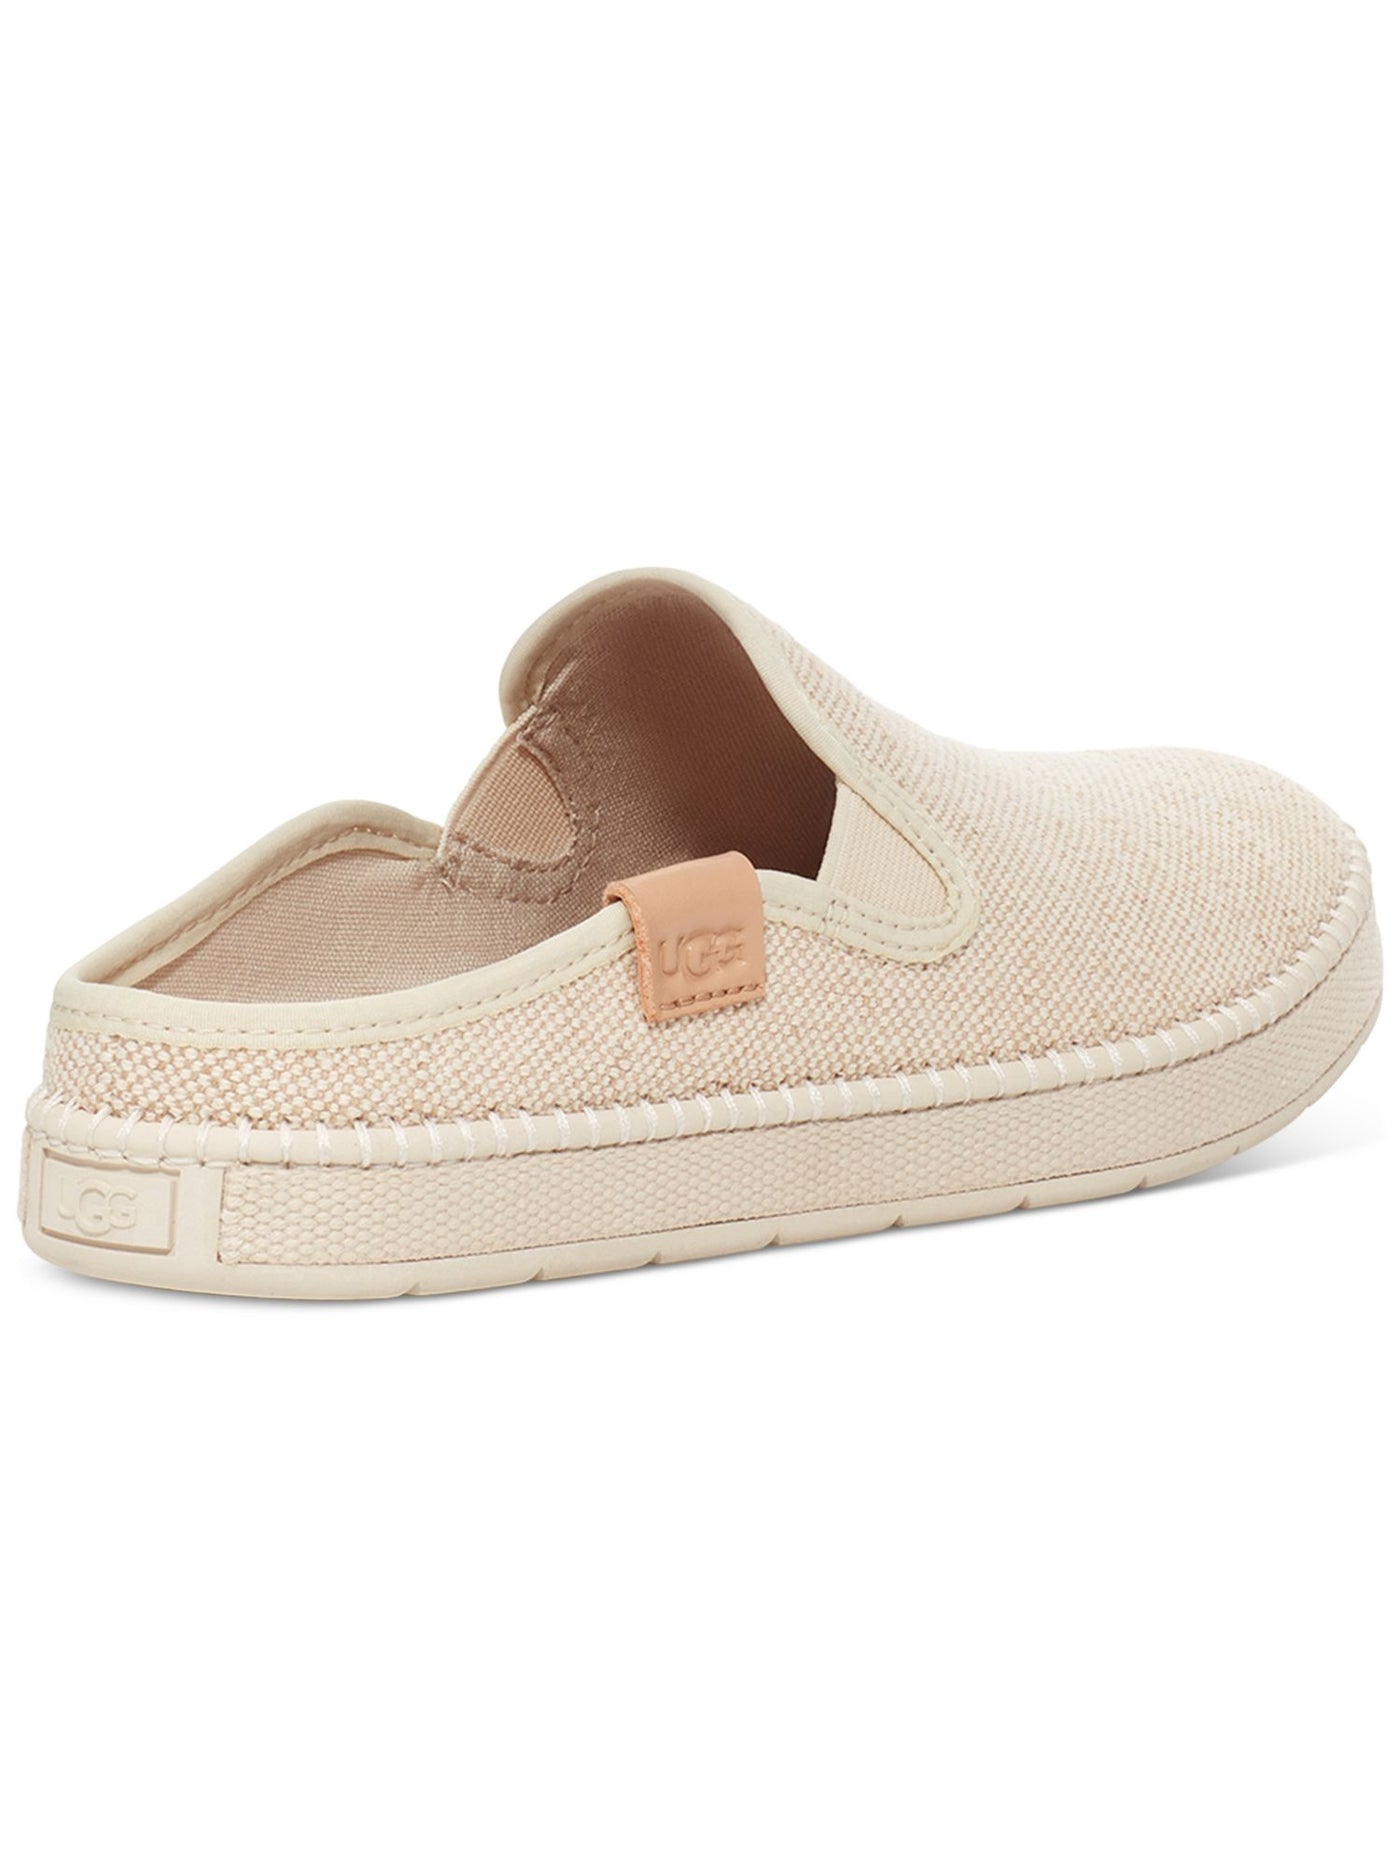 UGG Womens Beige Woven Goring Removable Insole Cushioned Delu Round Toe Platform Slip On Mules 6.5